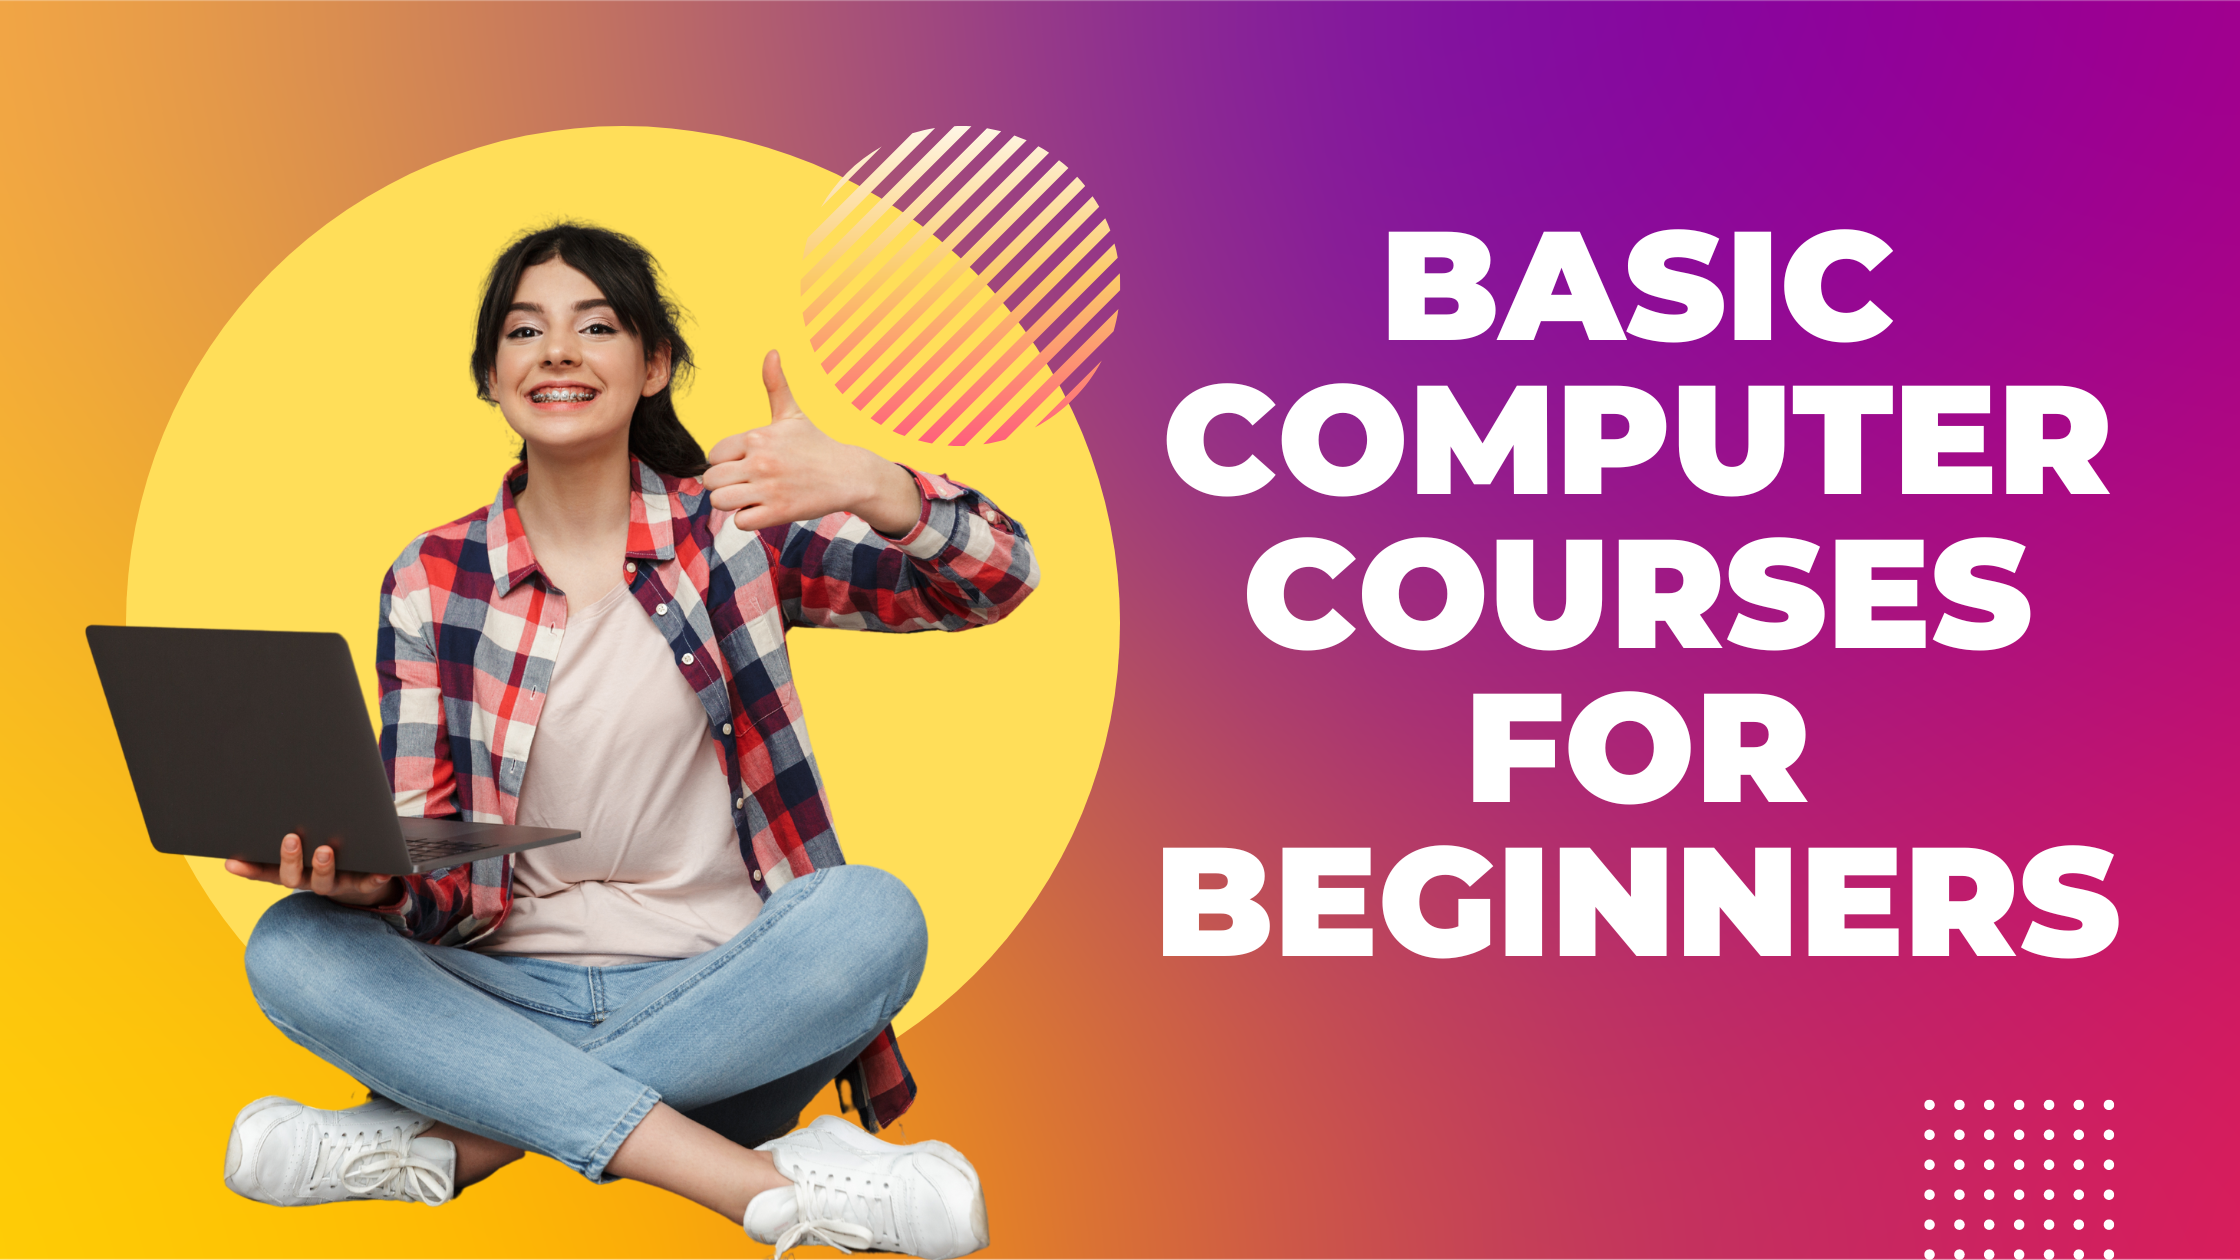 Basic Computer Courses For Beginners